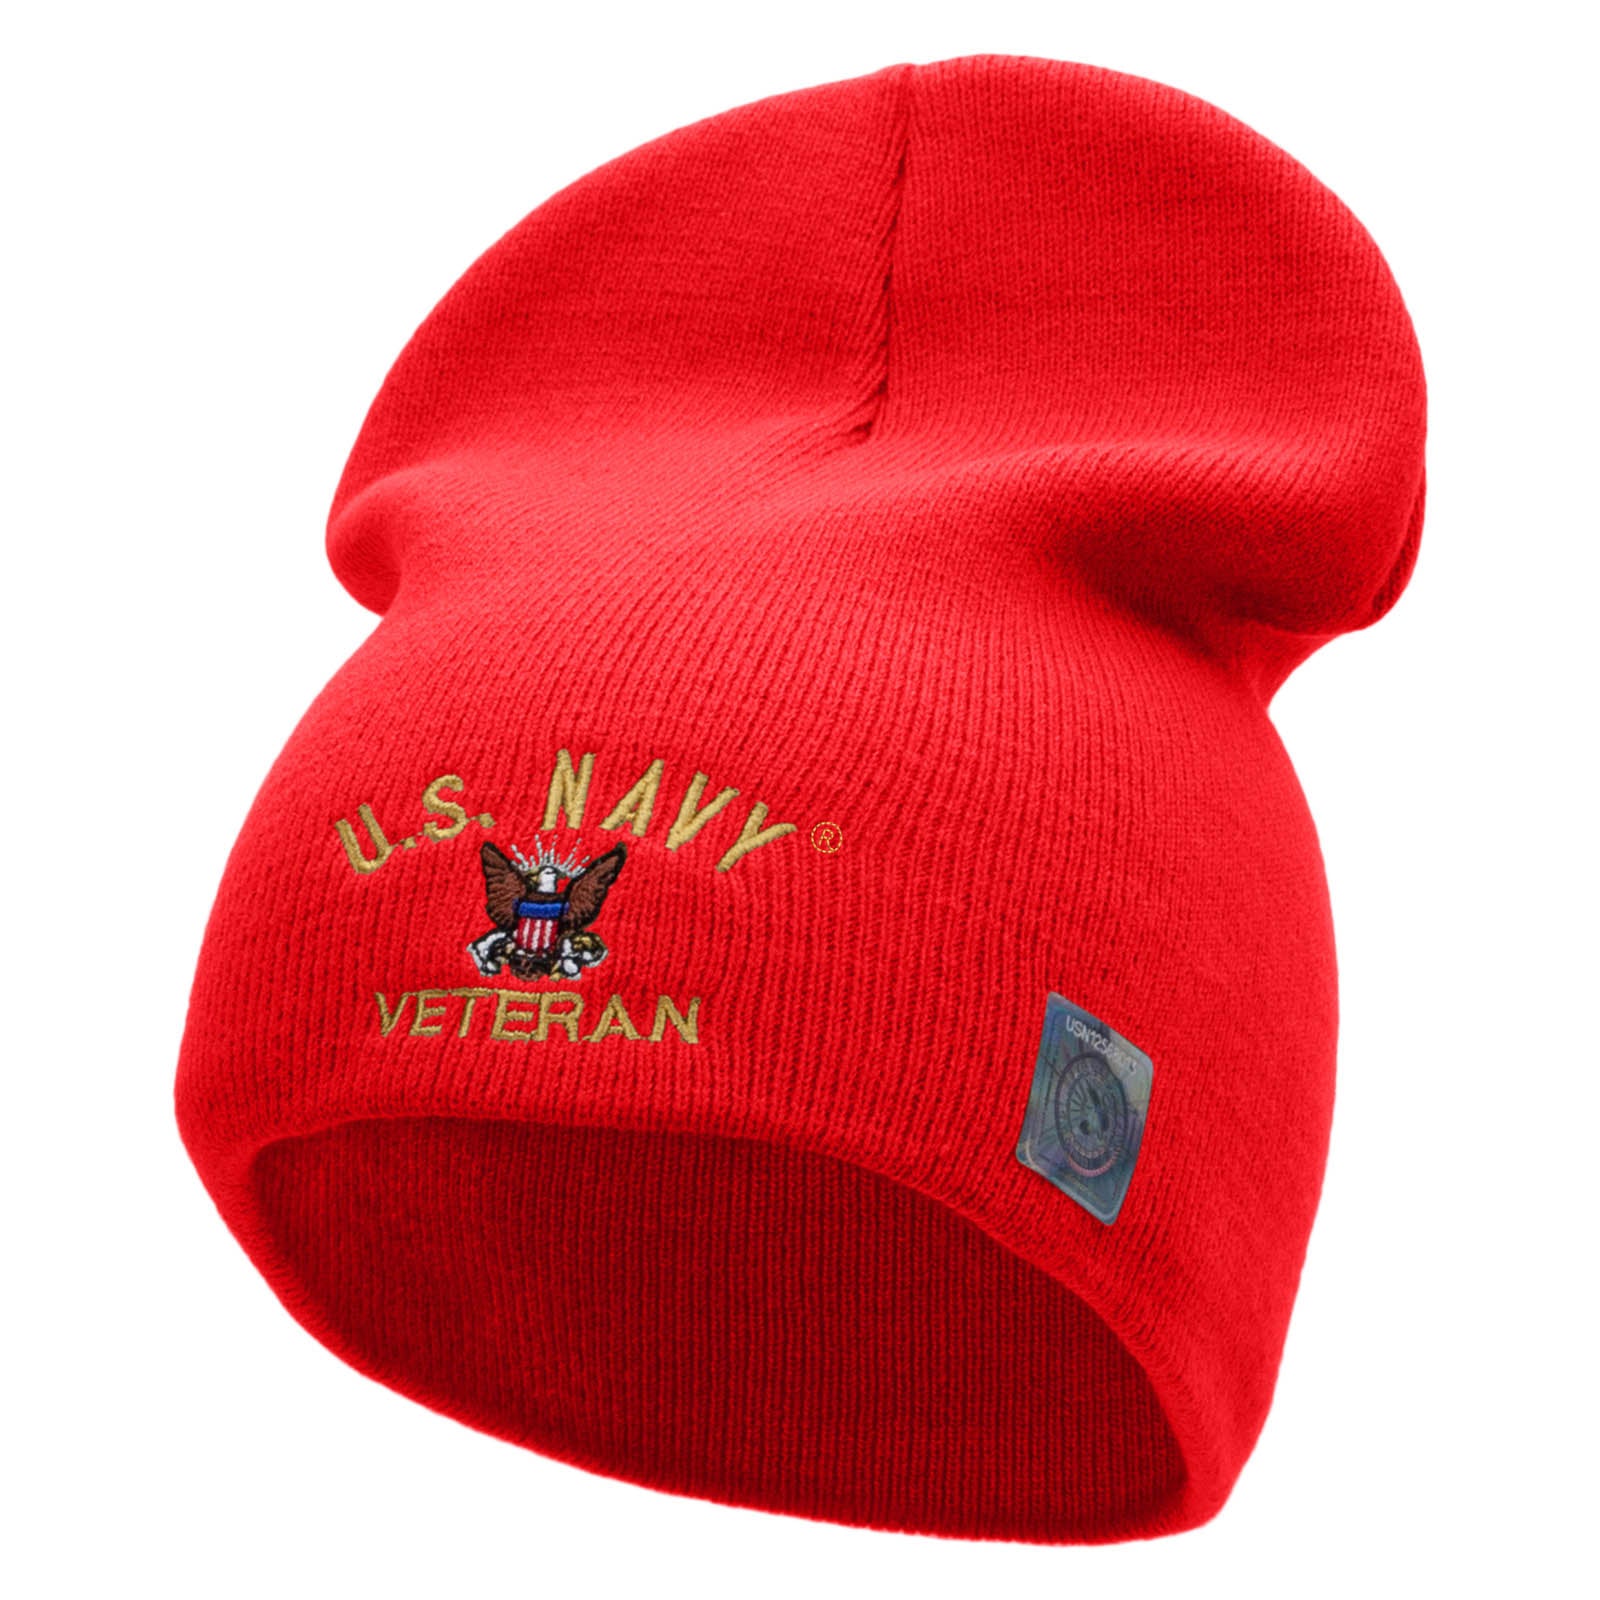 Licensed US Navy Veteran Military Embroidered Short Beanie Made in USA - Red OSFM